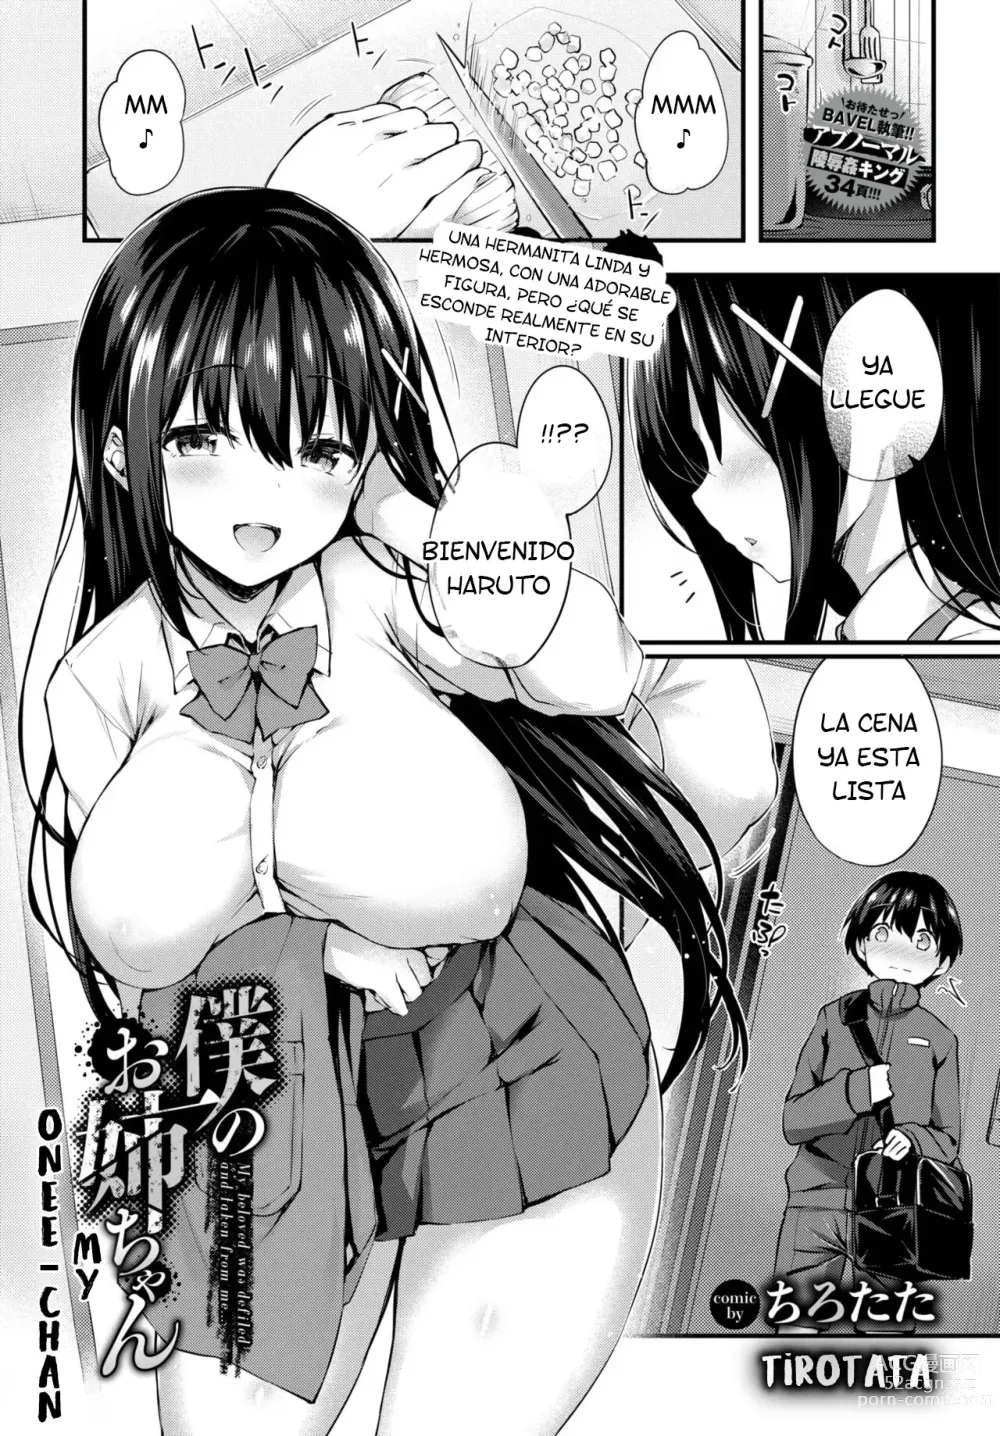 Page 1 of manga Boku no Onee-chan - My beloved was defiled and taken from me...